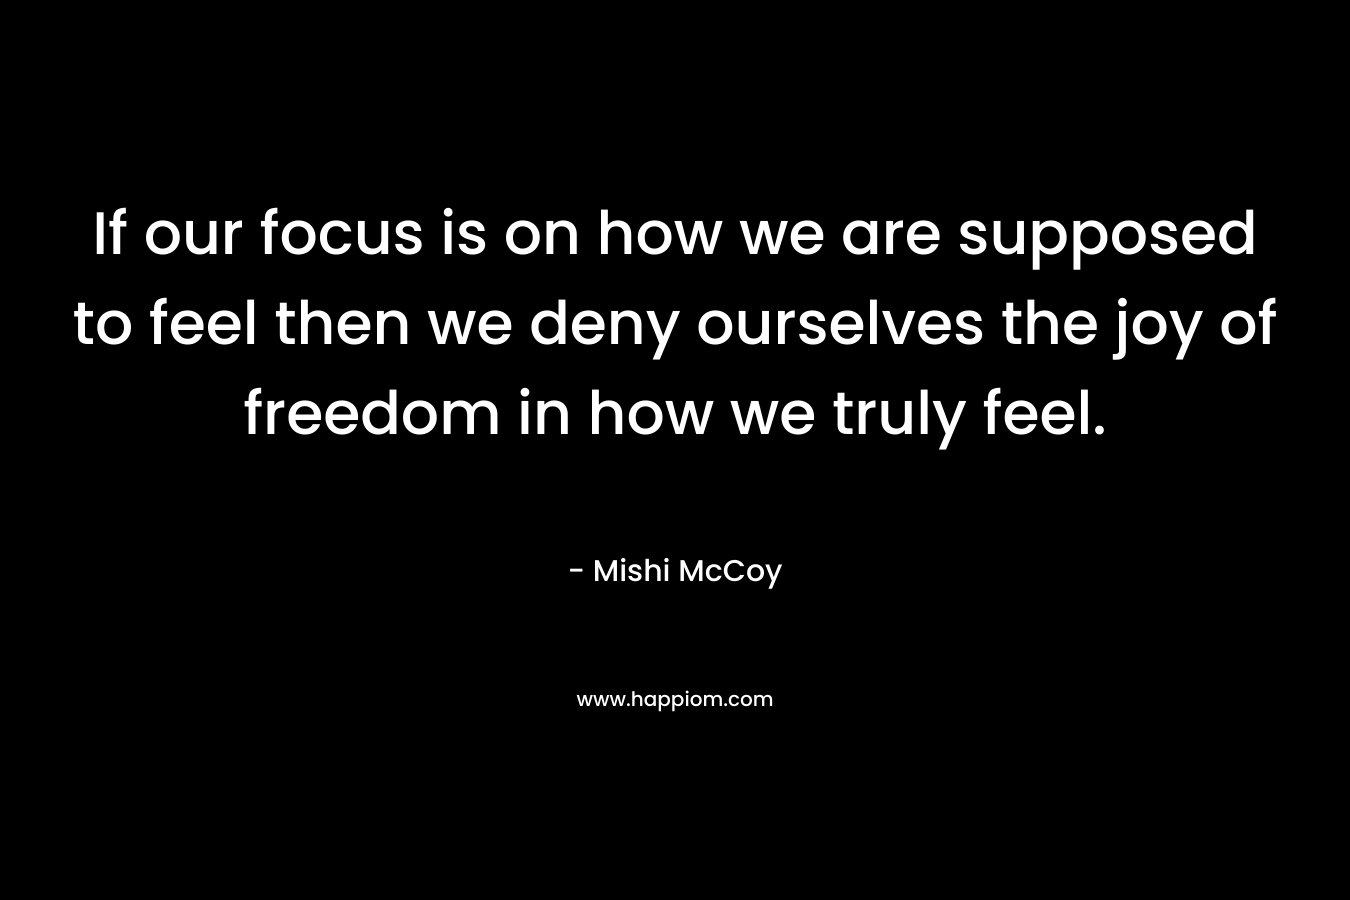 If our focus is on how we are supposed to feel then we deny ourselves the joy of freedom in how we truly feel.